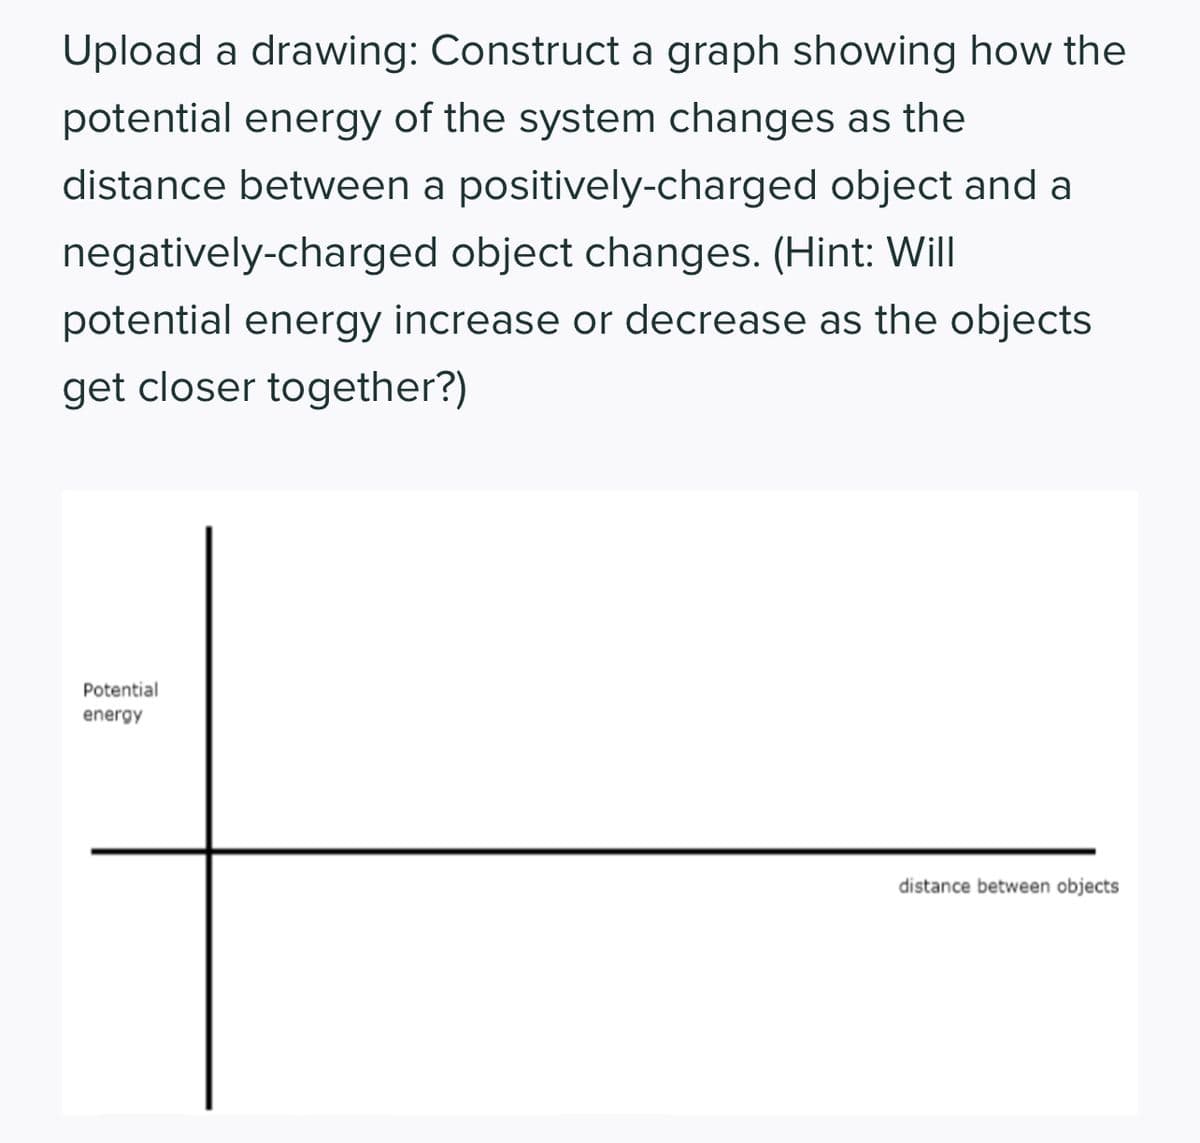 Upload a drawing: Construct a graph showing how the
potential energy of the system changes as the
distance between a positively-charged object and a
negatively-charged object changes. (Hint: Will
potential energy increase or decrease as the objects
get closer together?)
Potential
energy
distance between objects